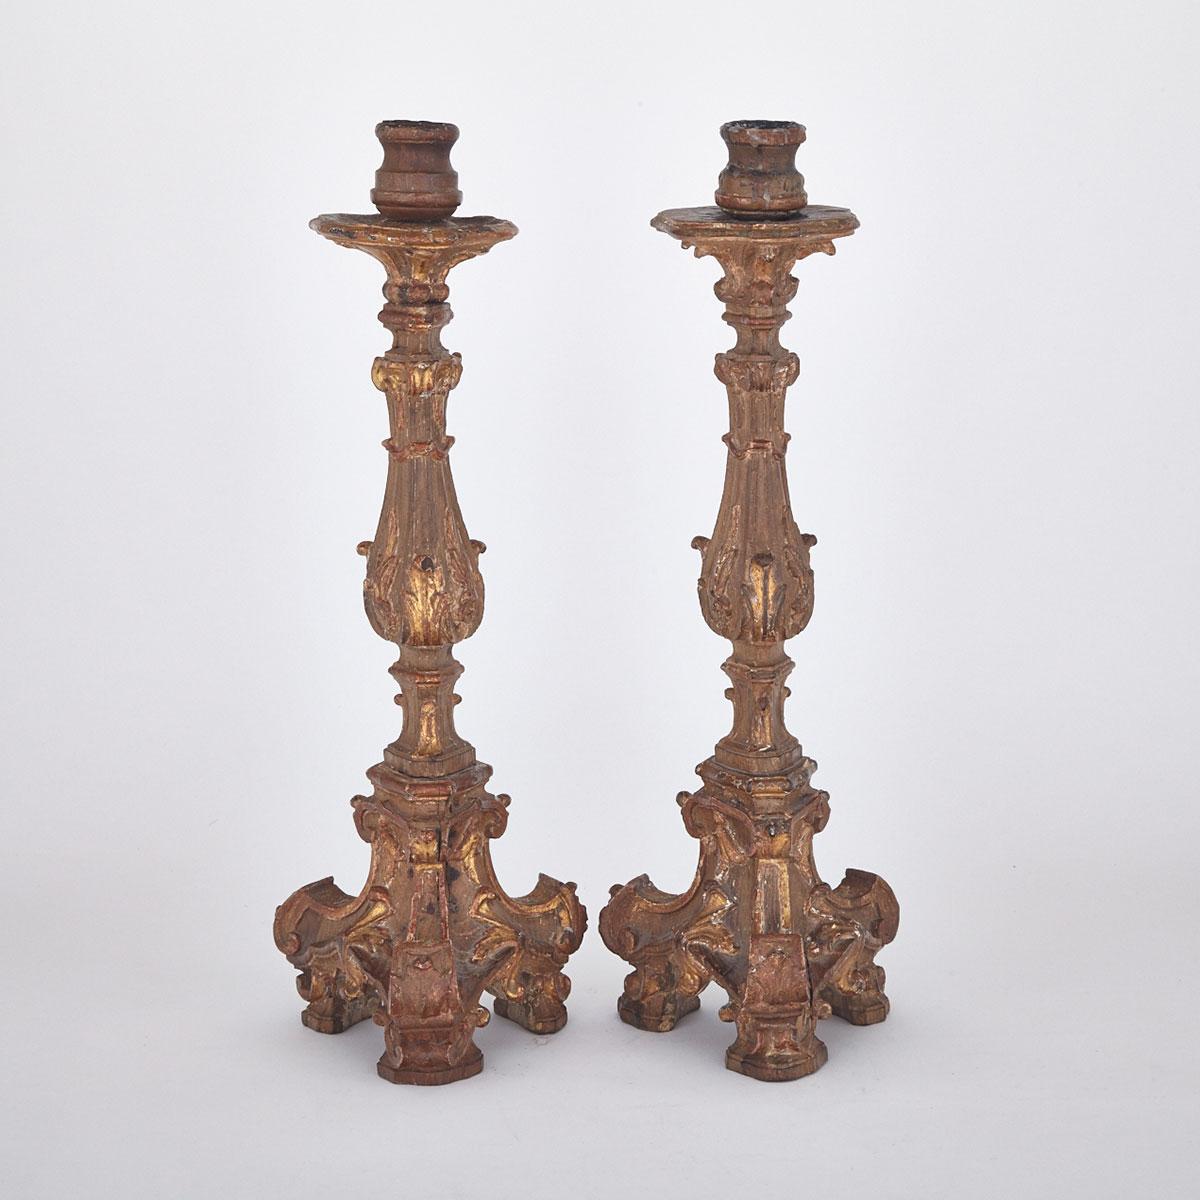 Pair of Louis XVI Carved and Parcel Gilt Prickets, 18th century